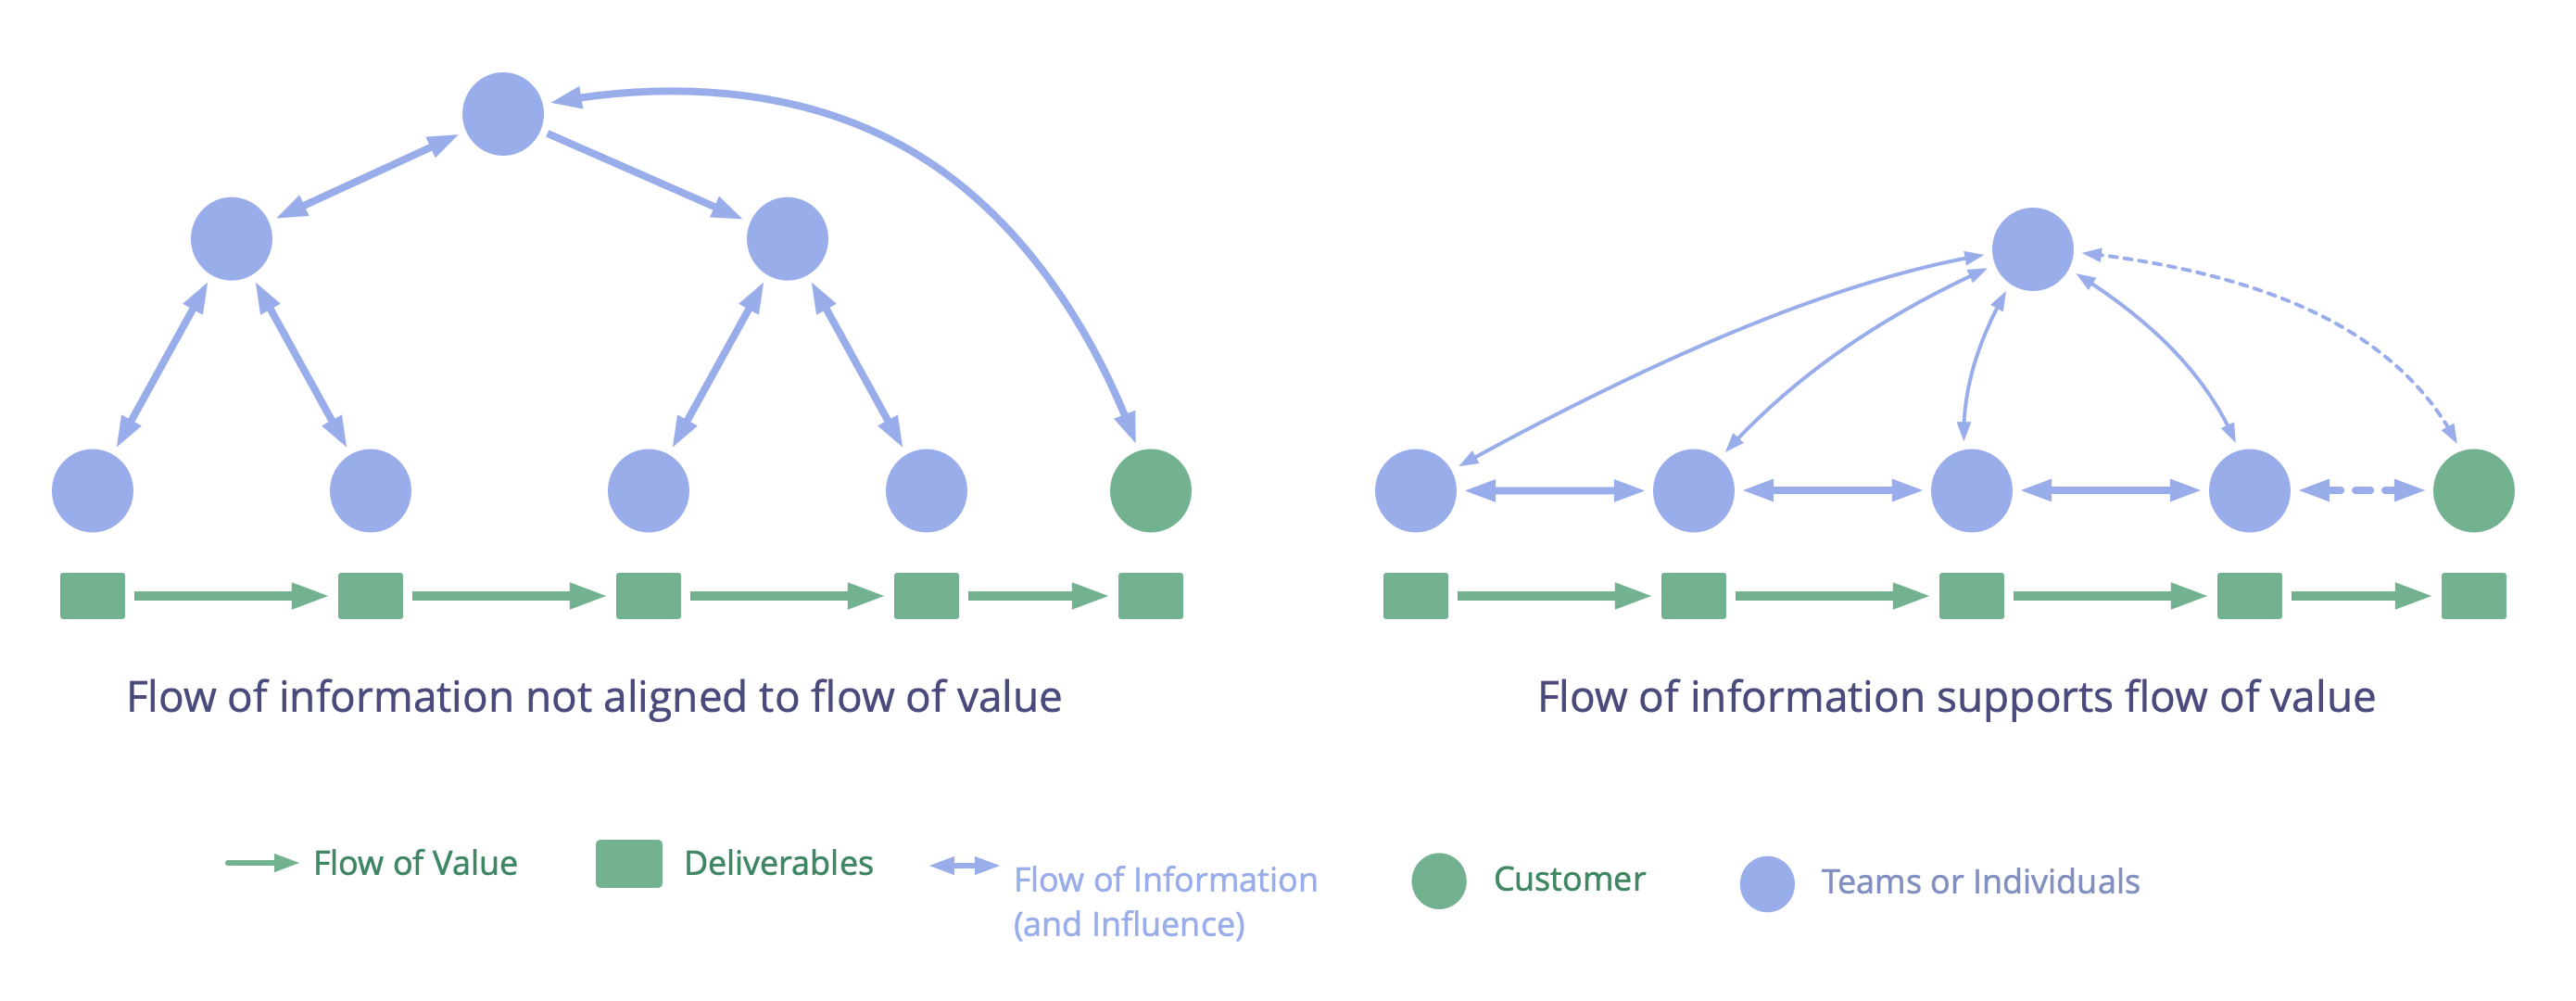 Aligning the flow of information to support the flow of value